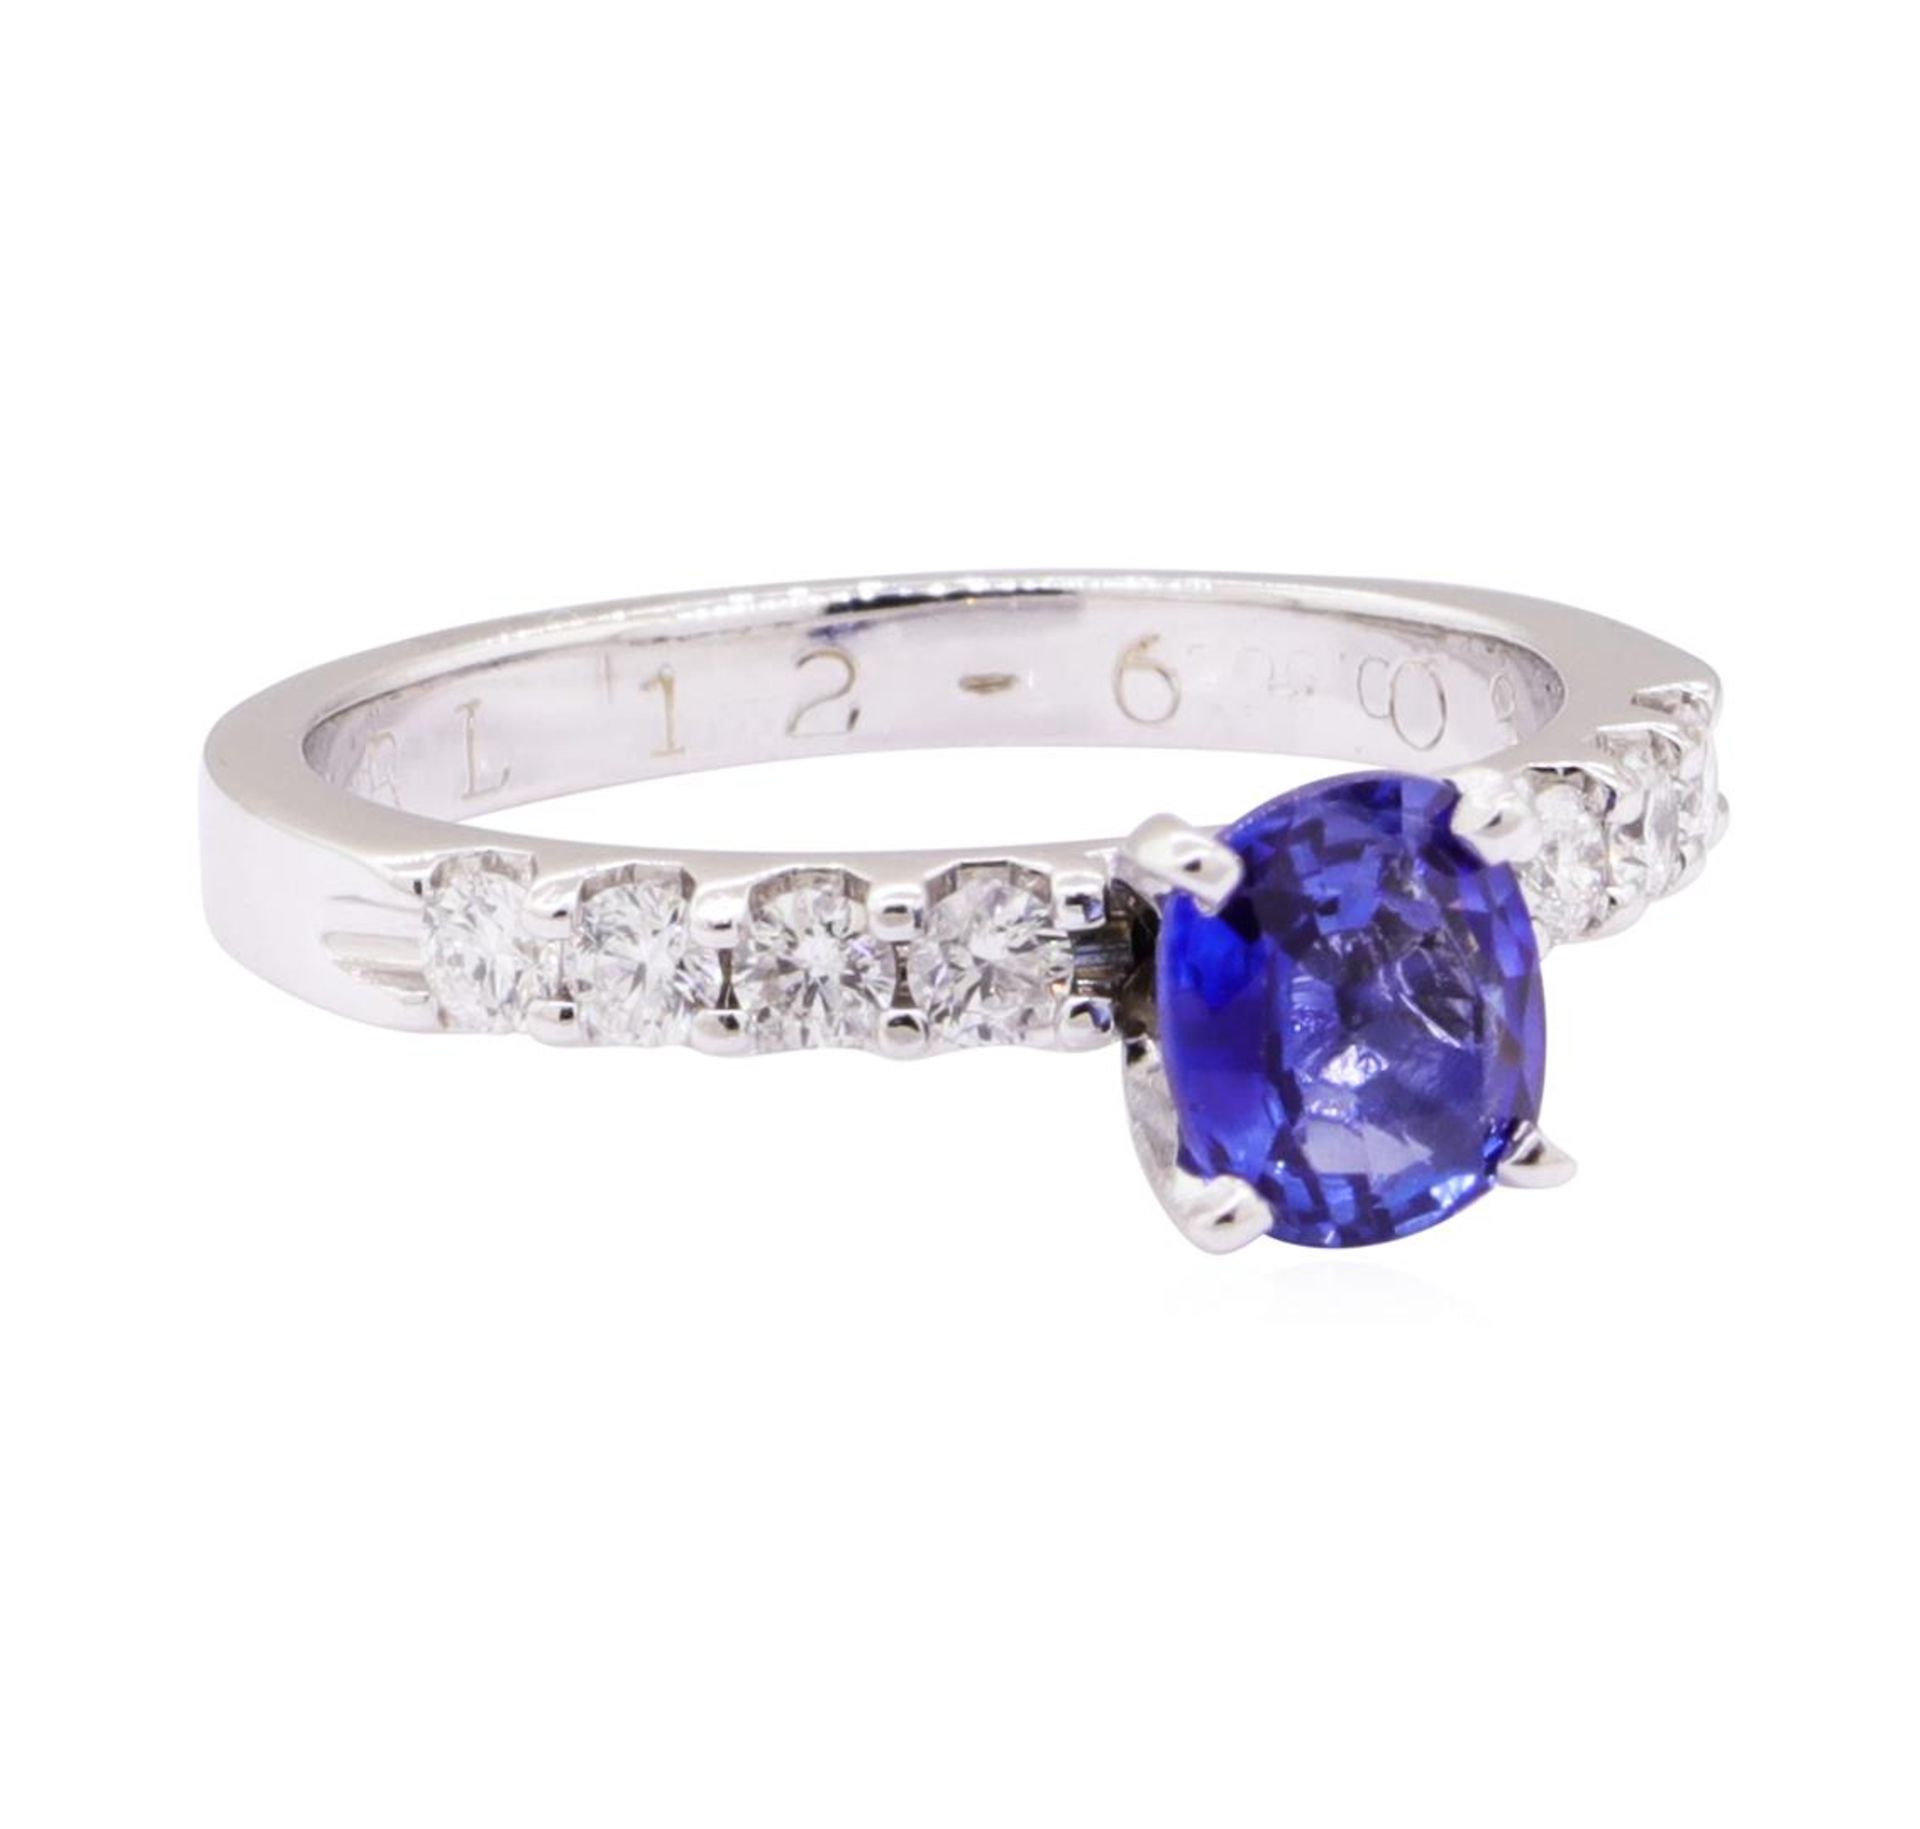 1.11ctw Blue Sapphire and Diamond Ring - 14KT White Gold